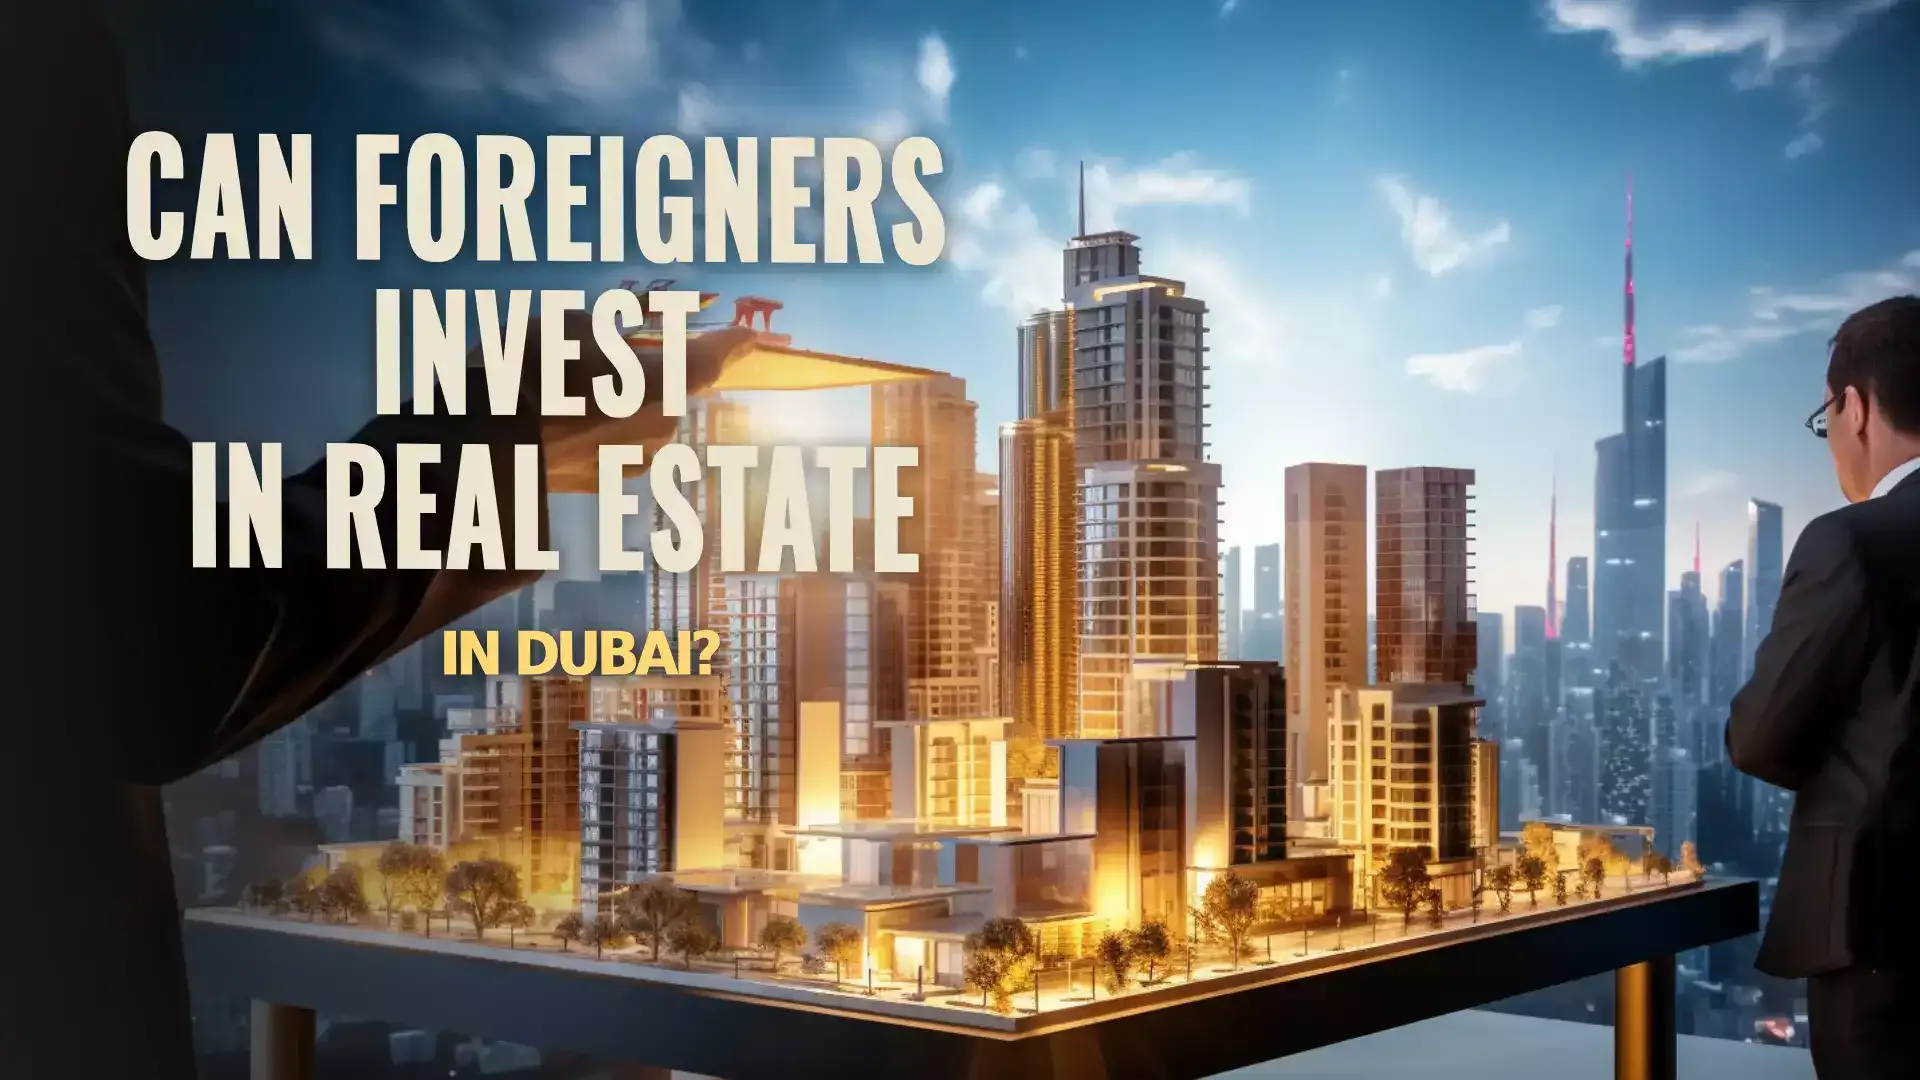 Skyscrapers in Dubai: Ideal for Real Estate Investment